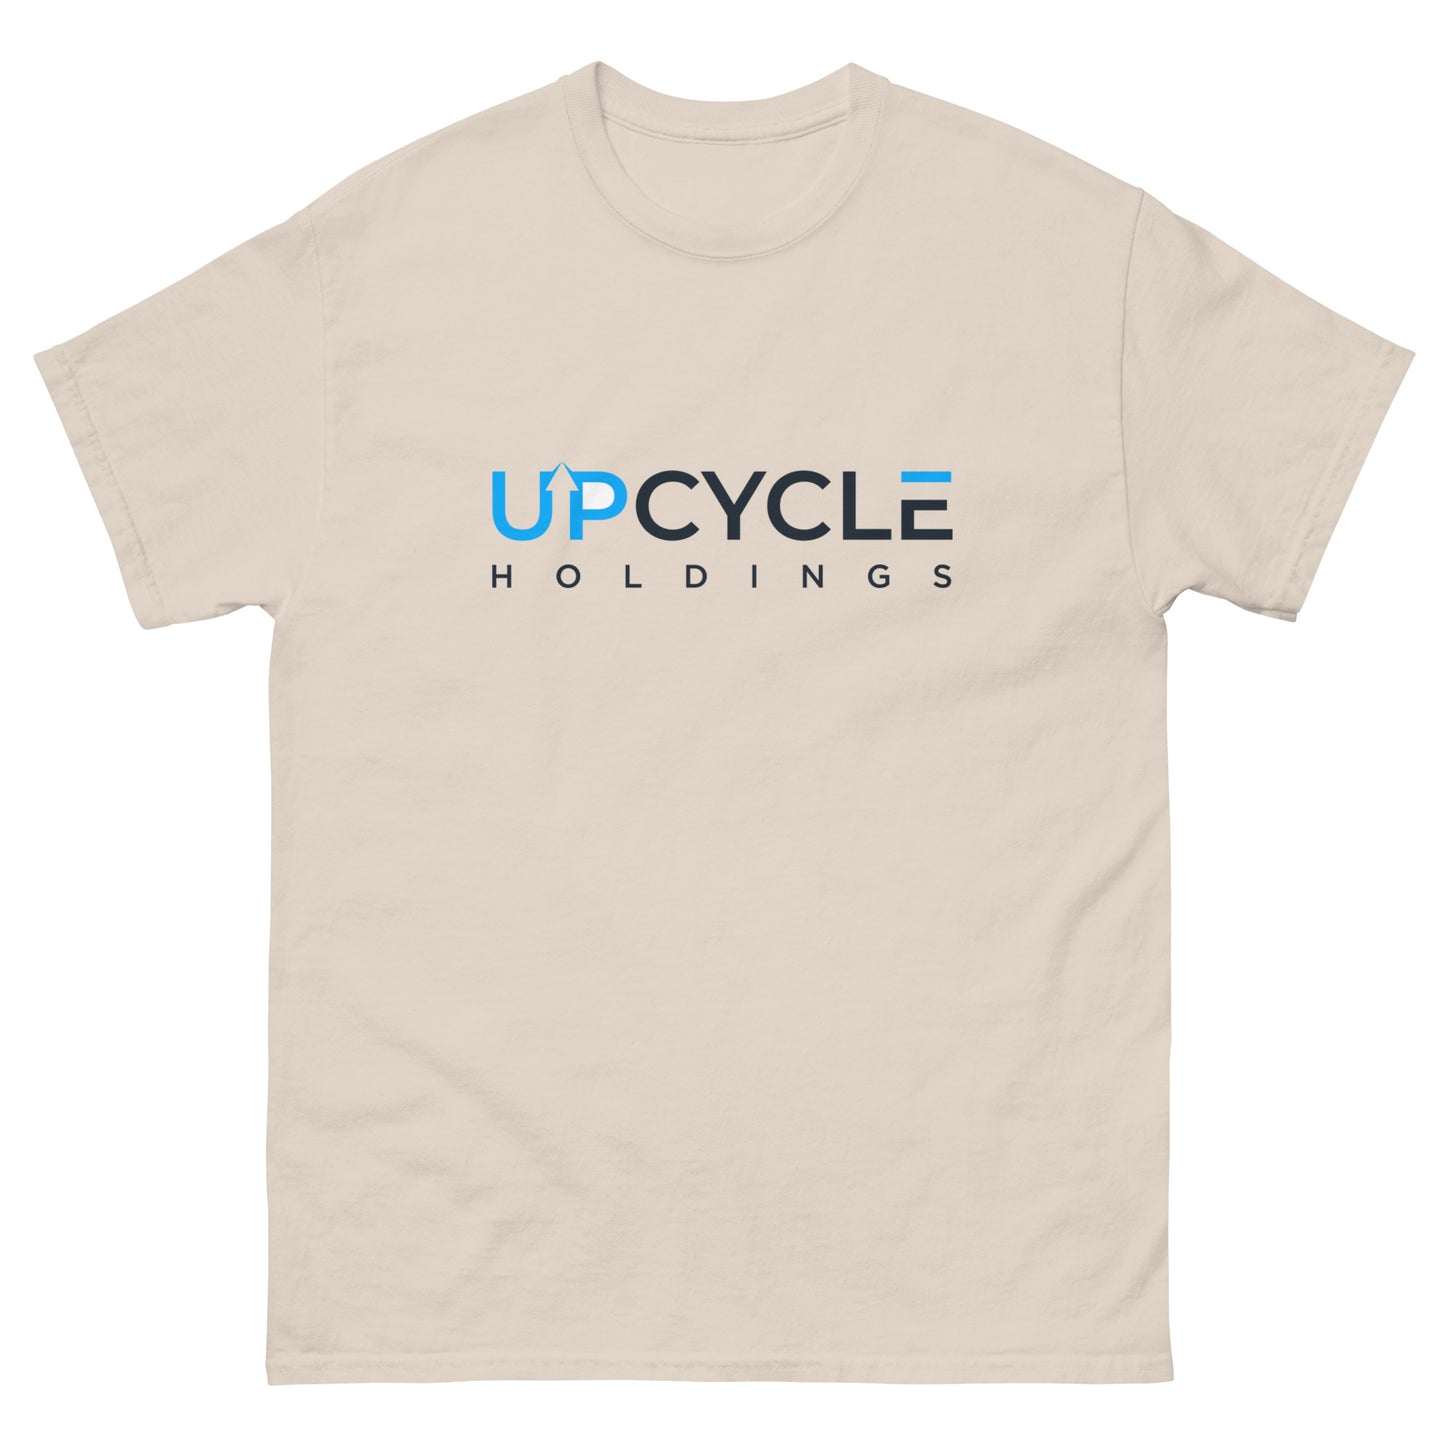 Upcycle t-shirt